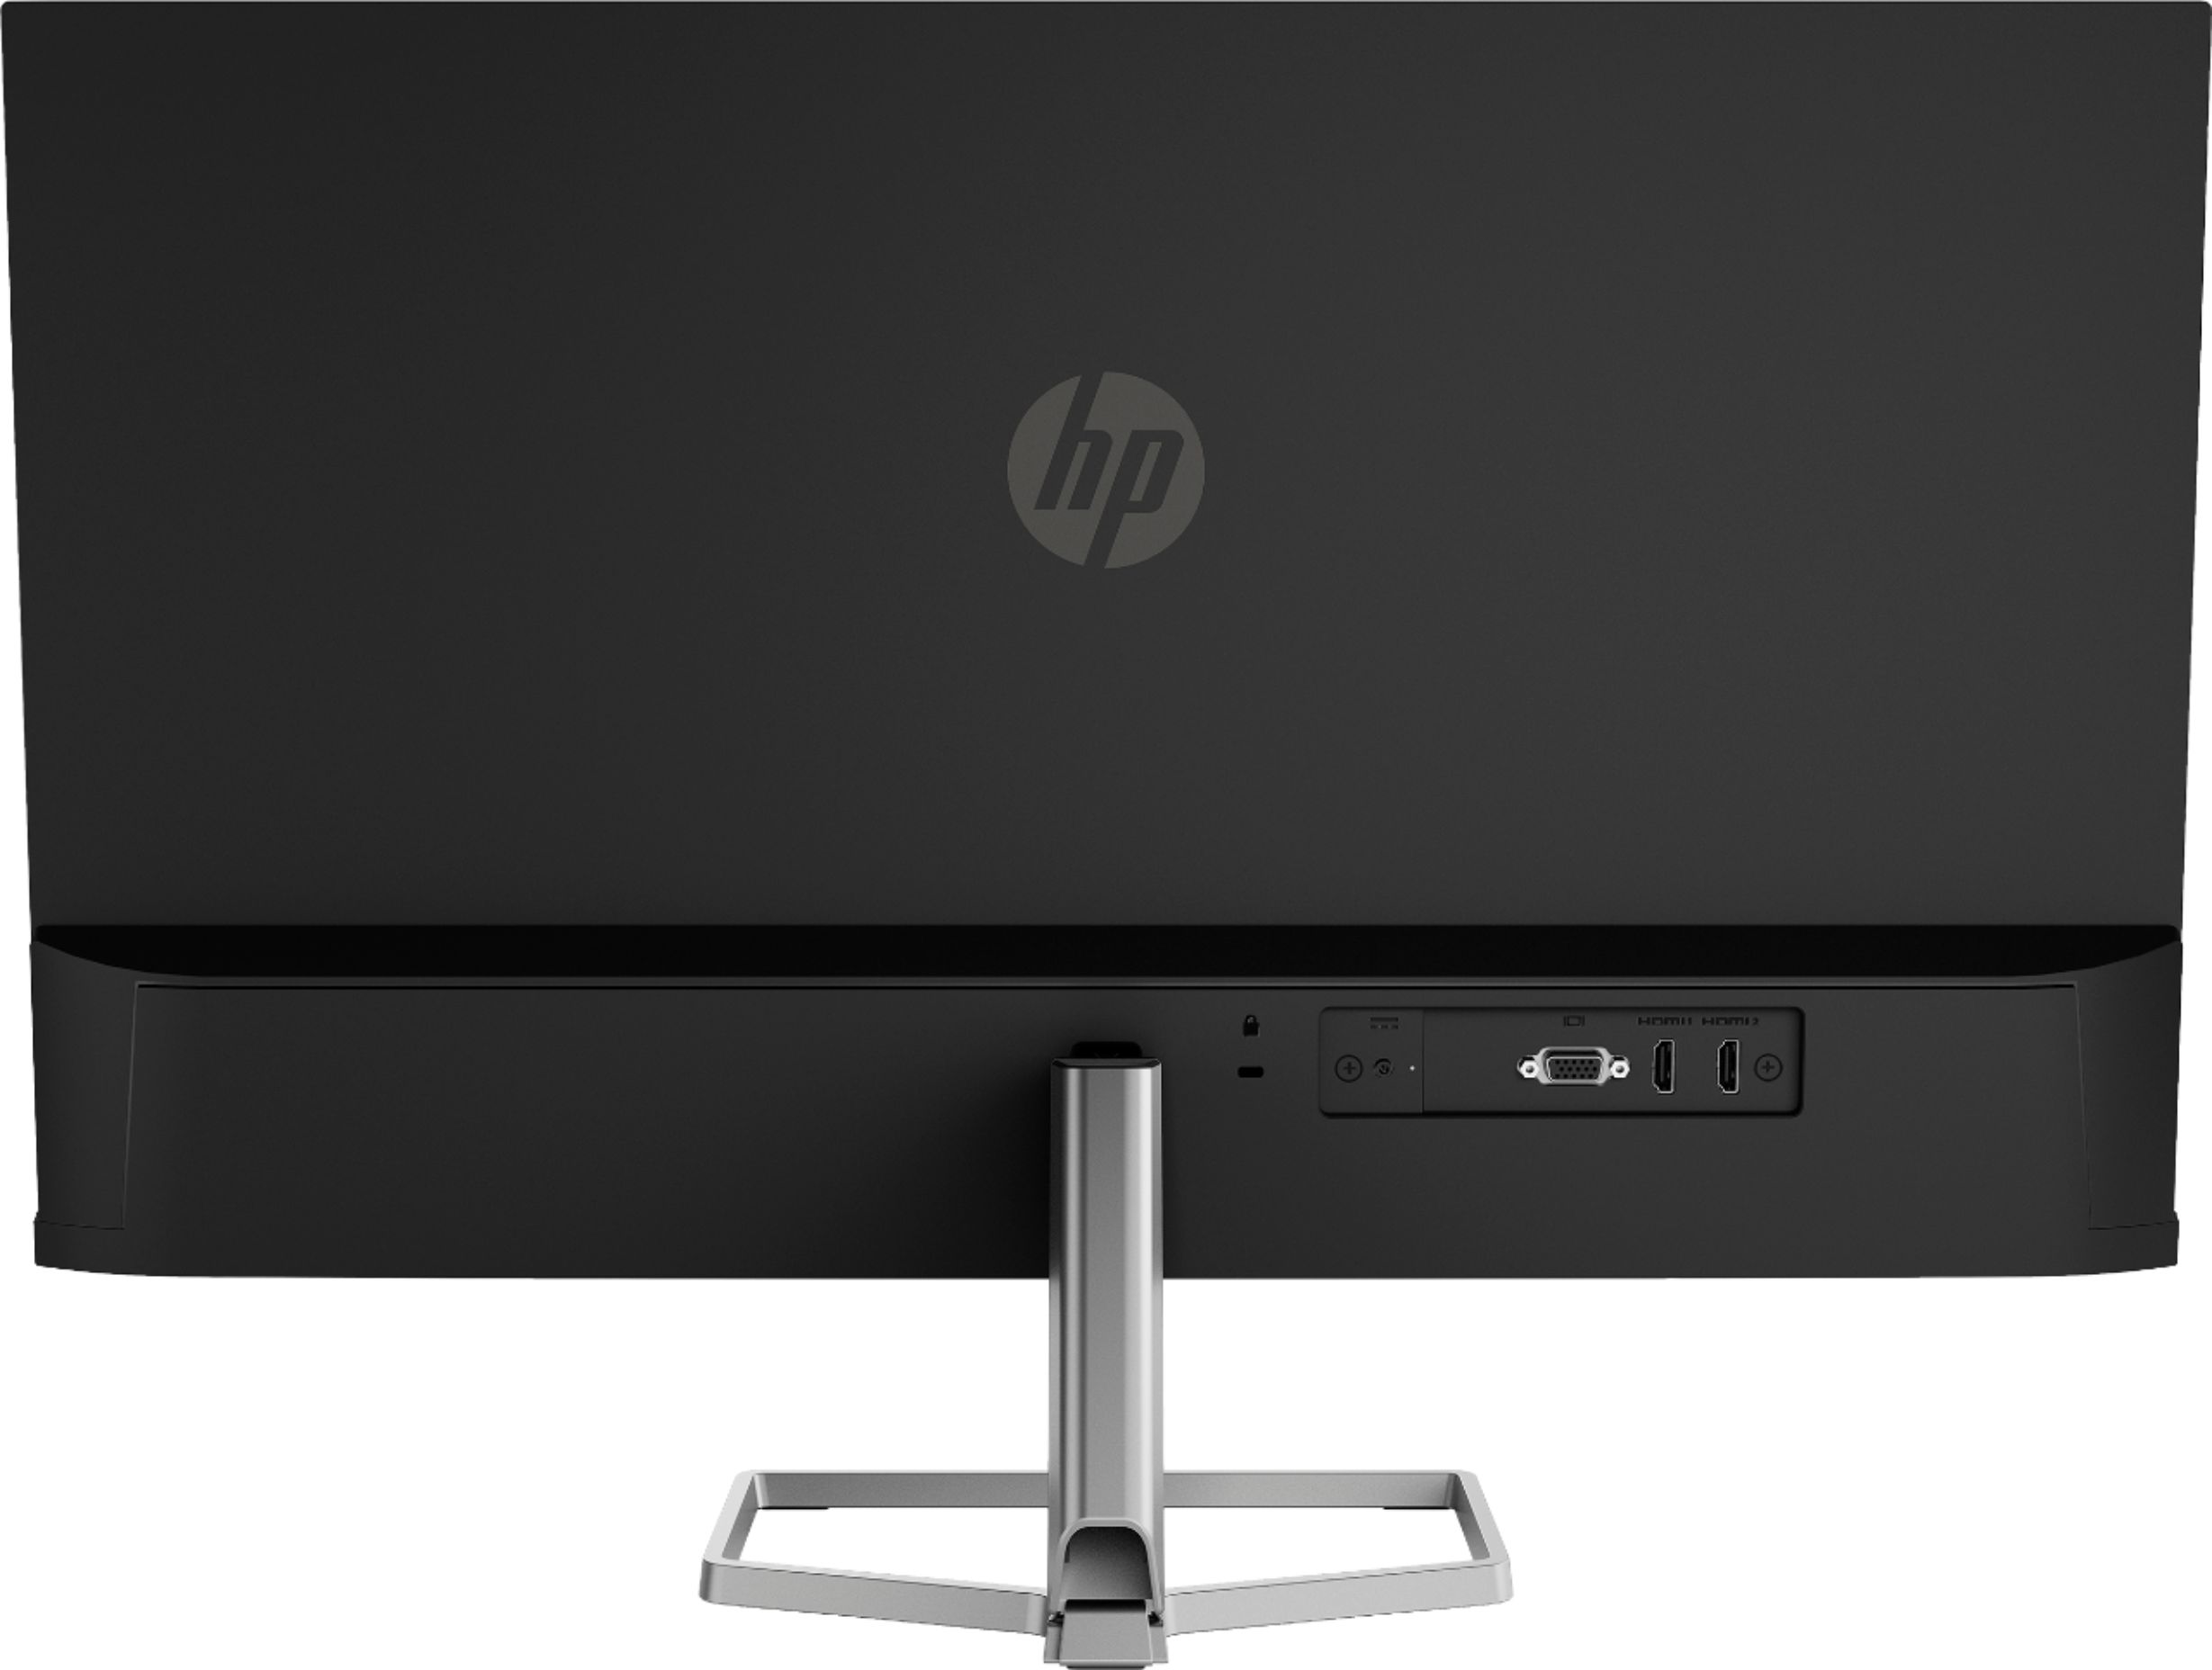 Back View: HP - Geek Squad Certified Refurbished 27" IPS LED FHD FreeSync Monitor - Silver And Black